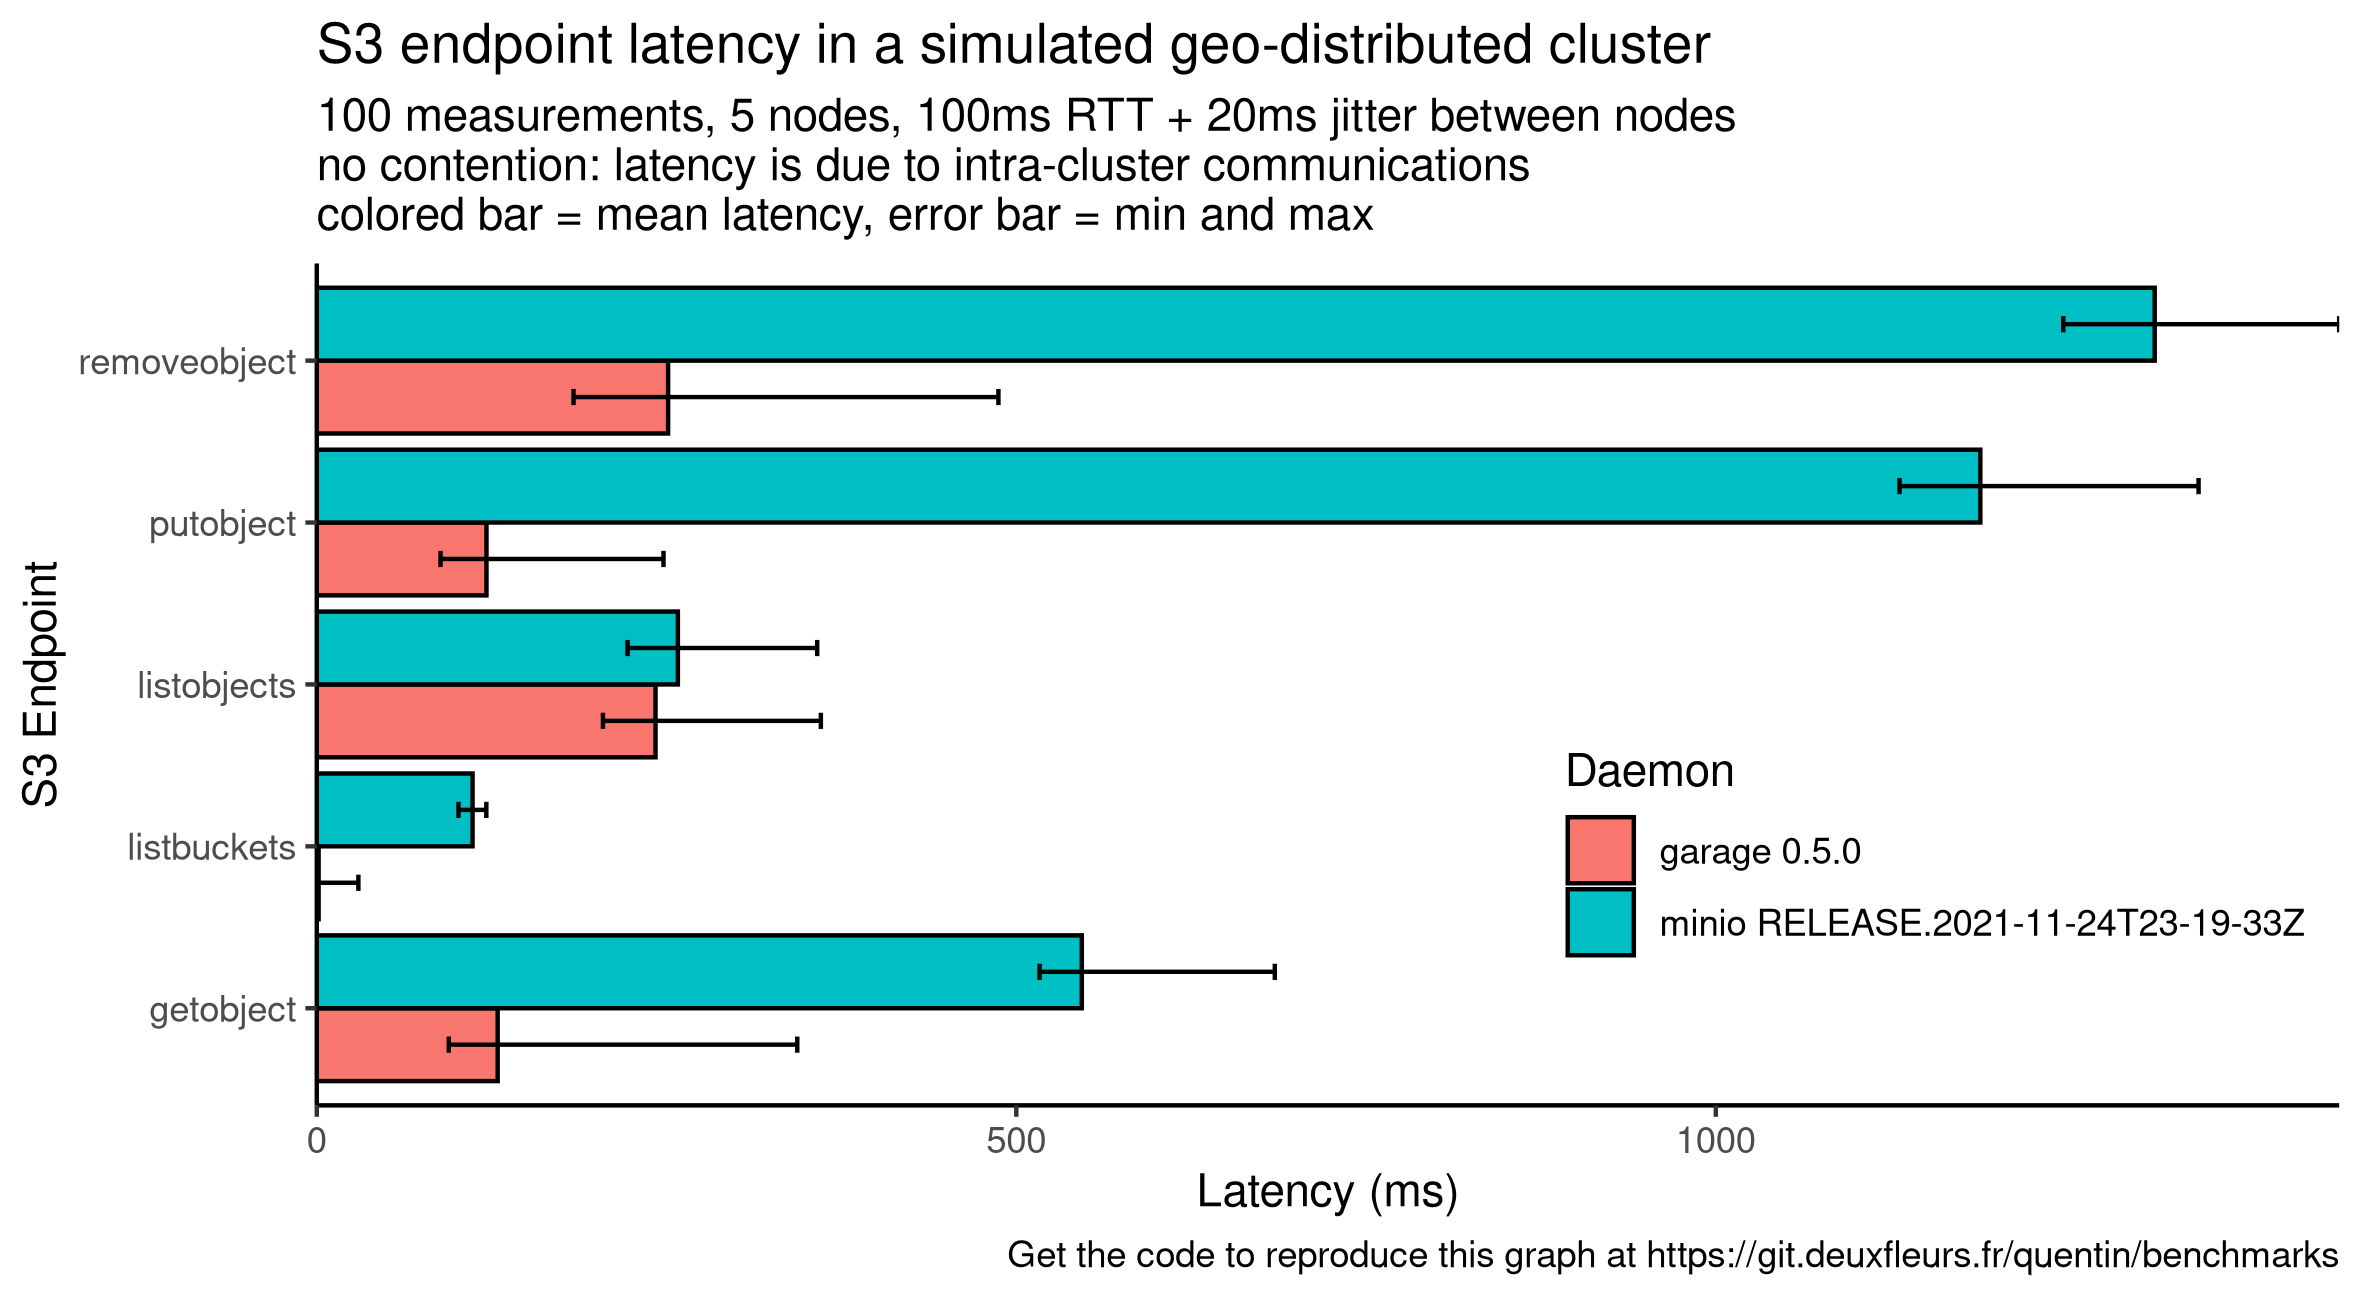 Comparison of endpoints latency for minio and garage